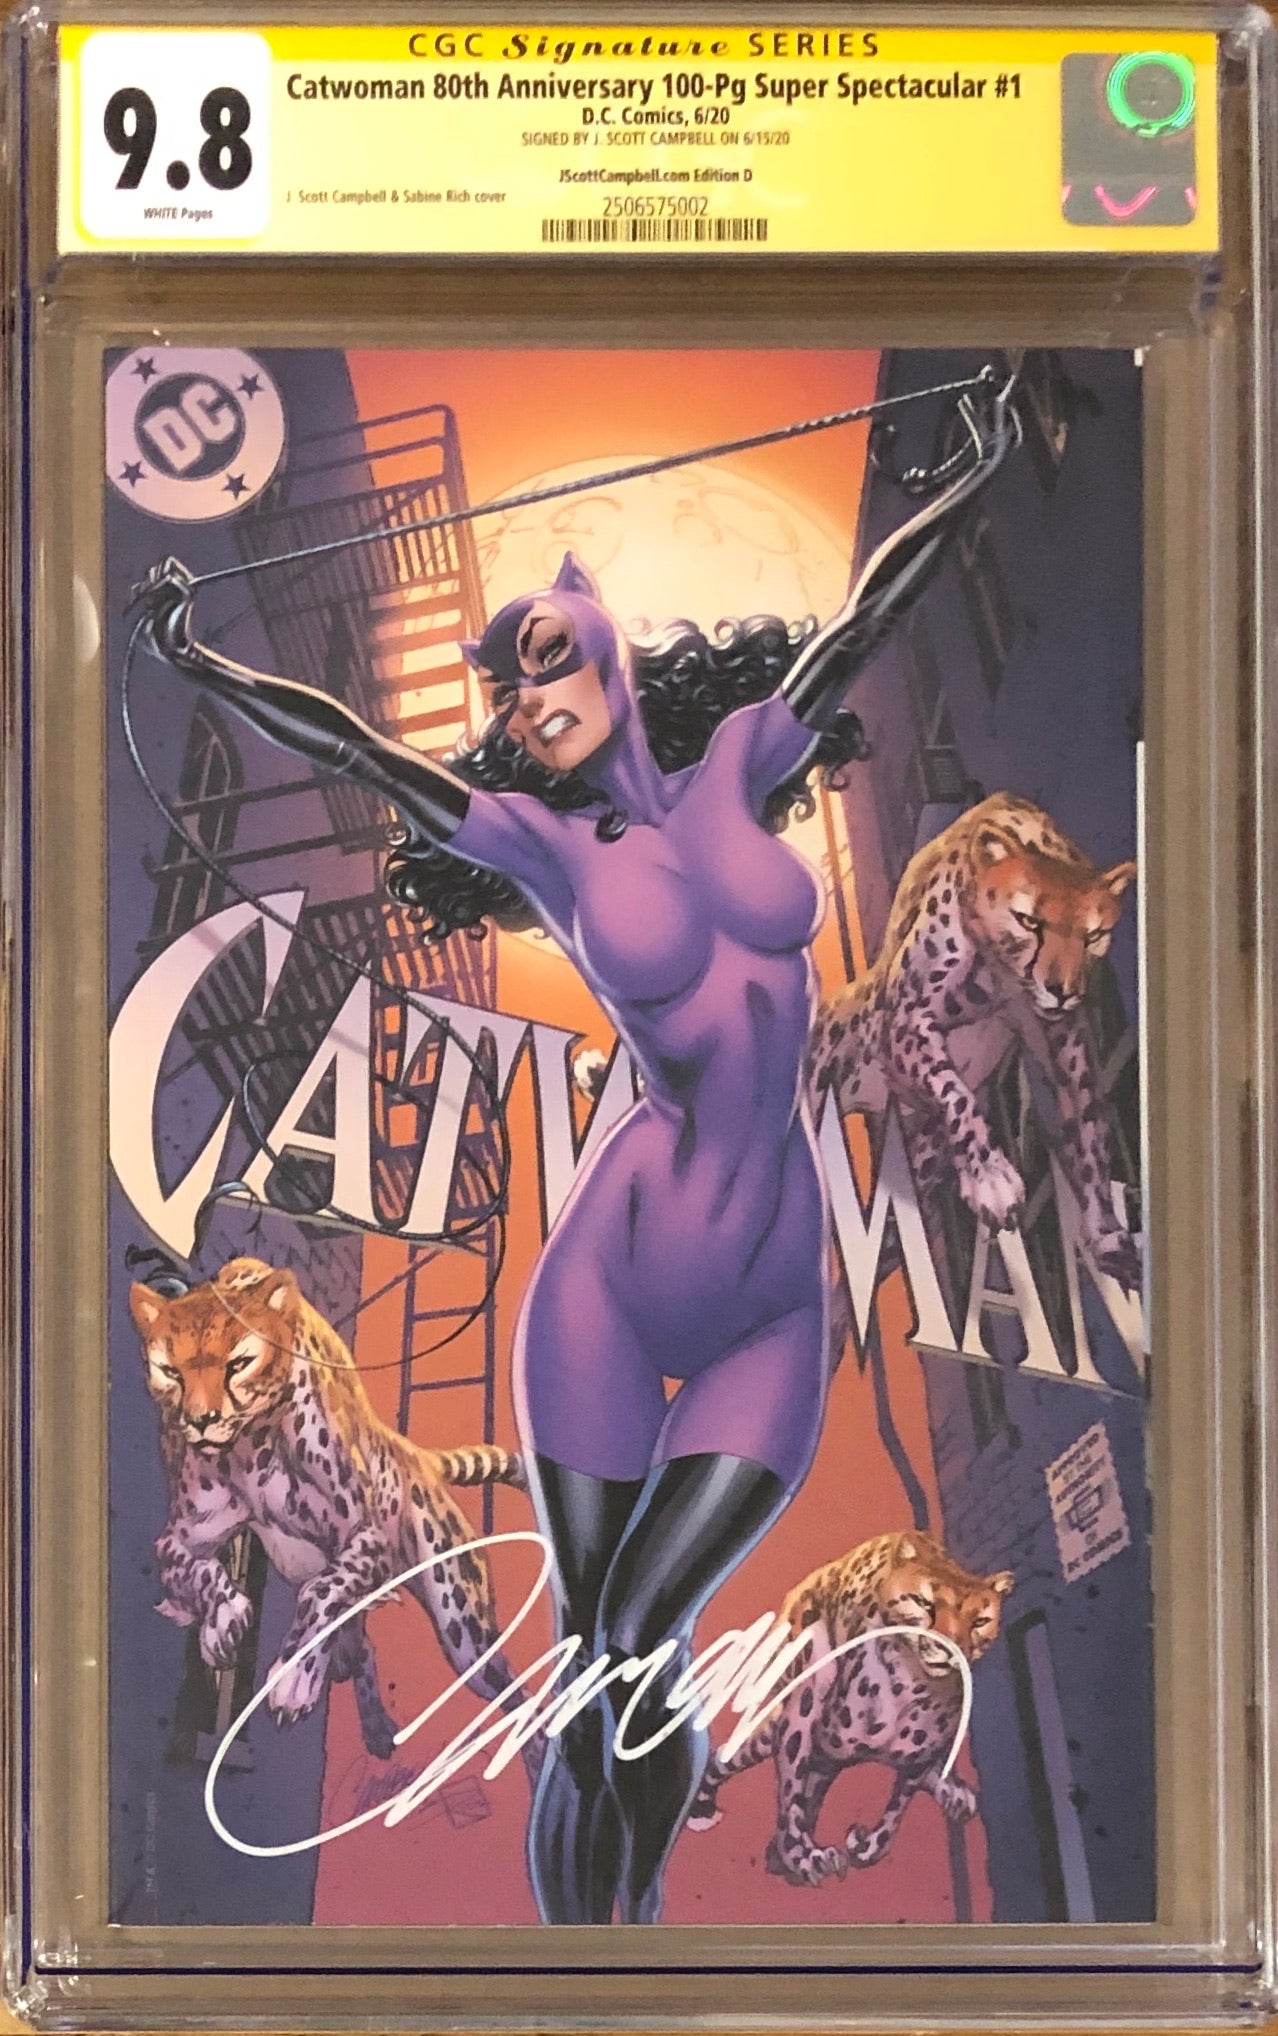 Catwoman 80th Anniversary 100 Page Super Spectacular #1 J. Scott Campbell Exclusive D "Jim Balent" CGC 9.8 SS